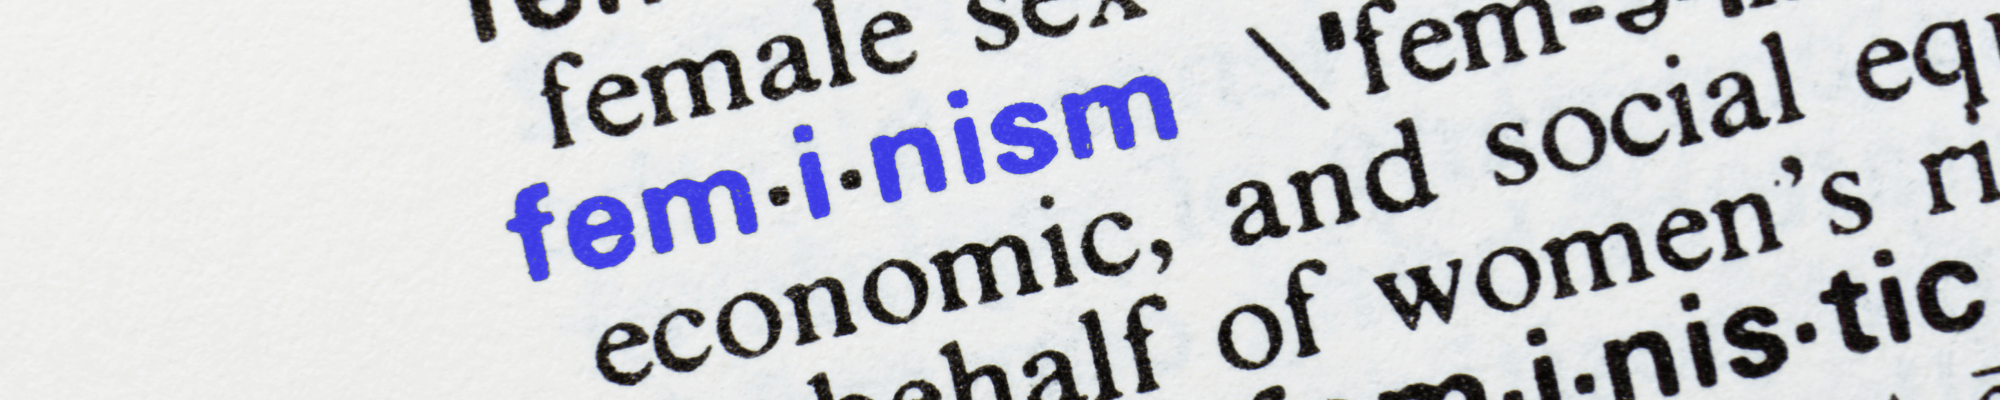 up close of dictionary page with word feminism highlighted